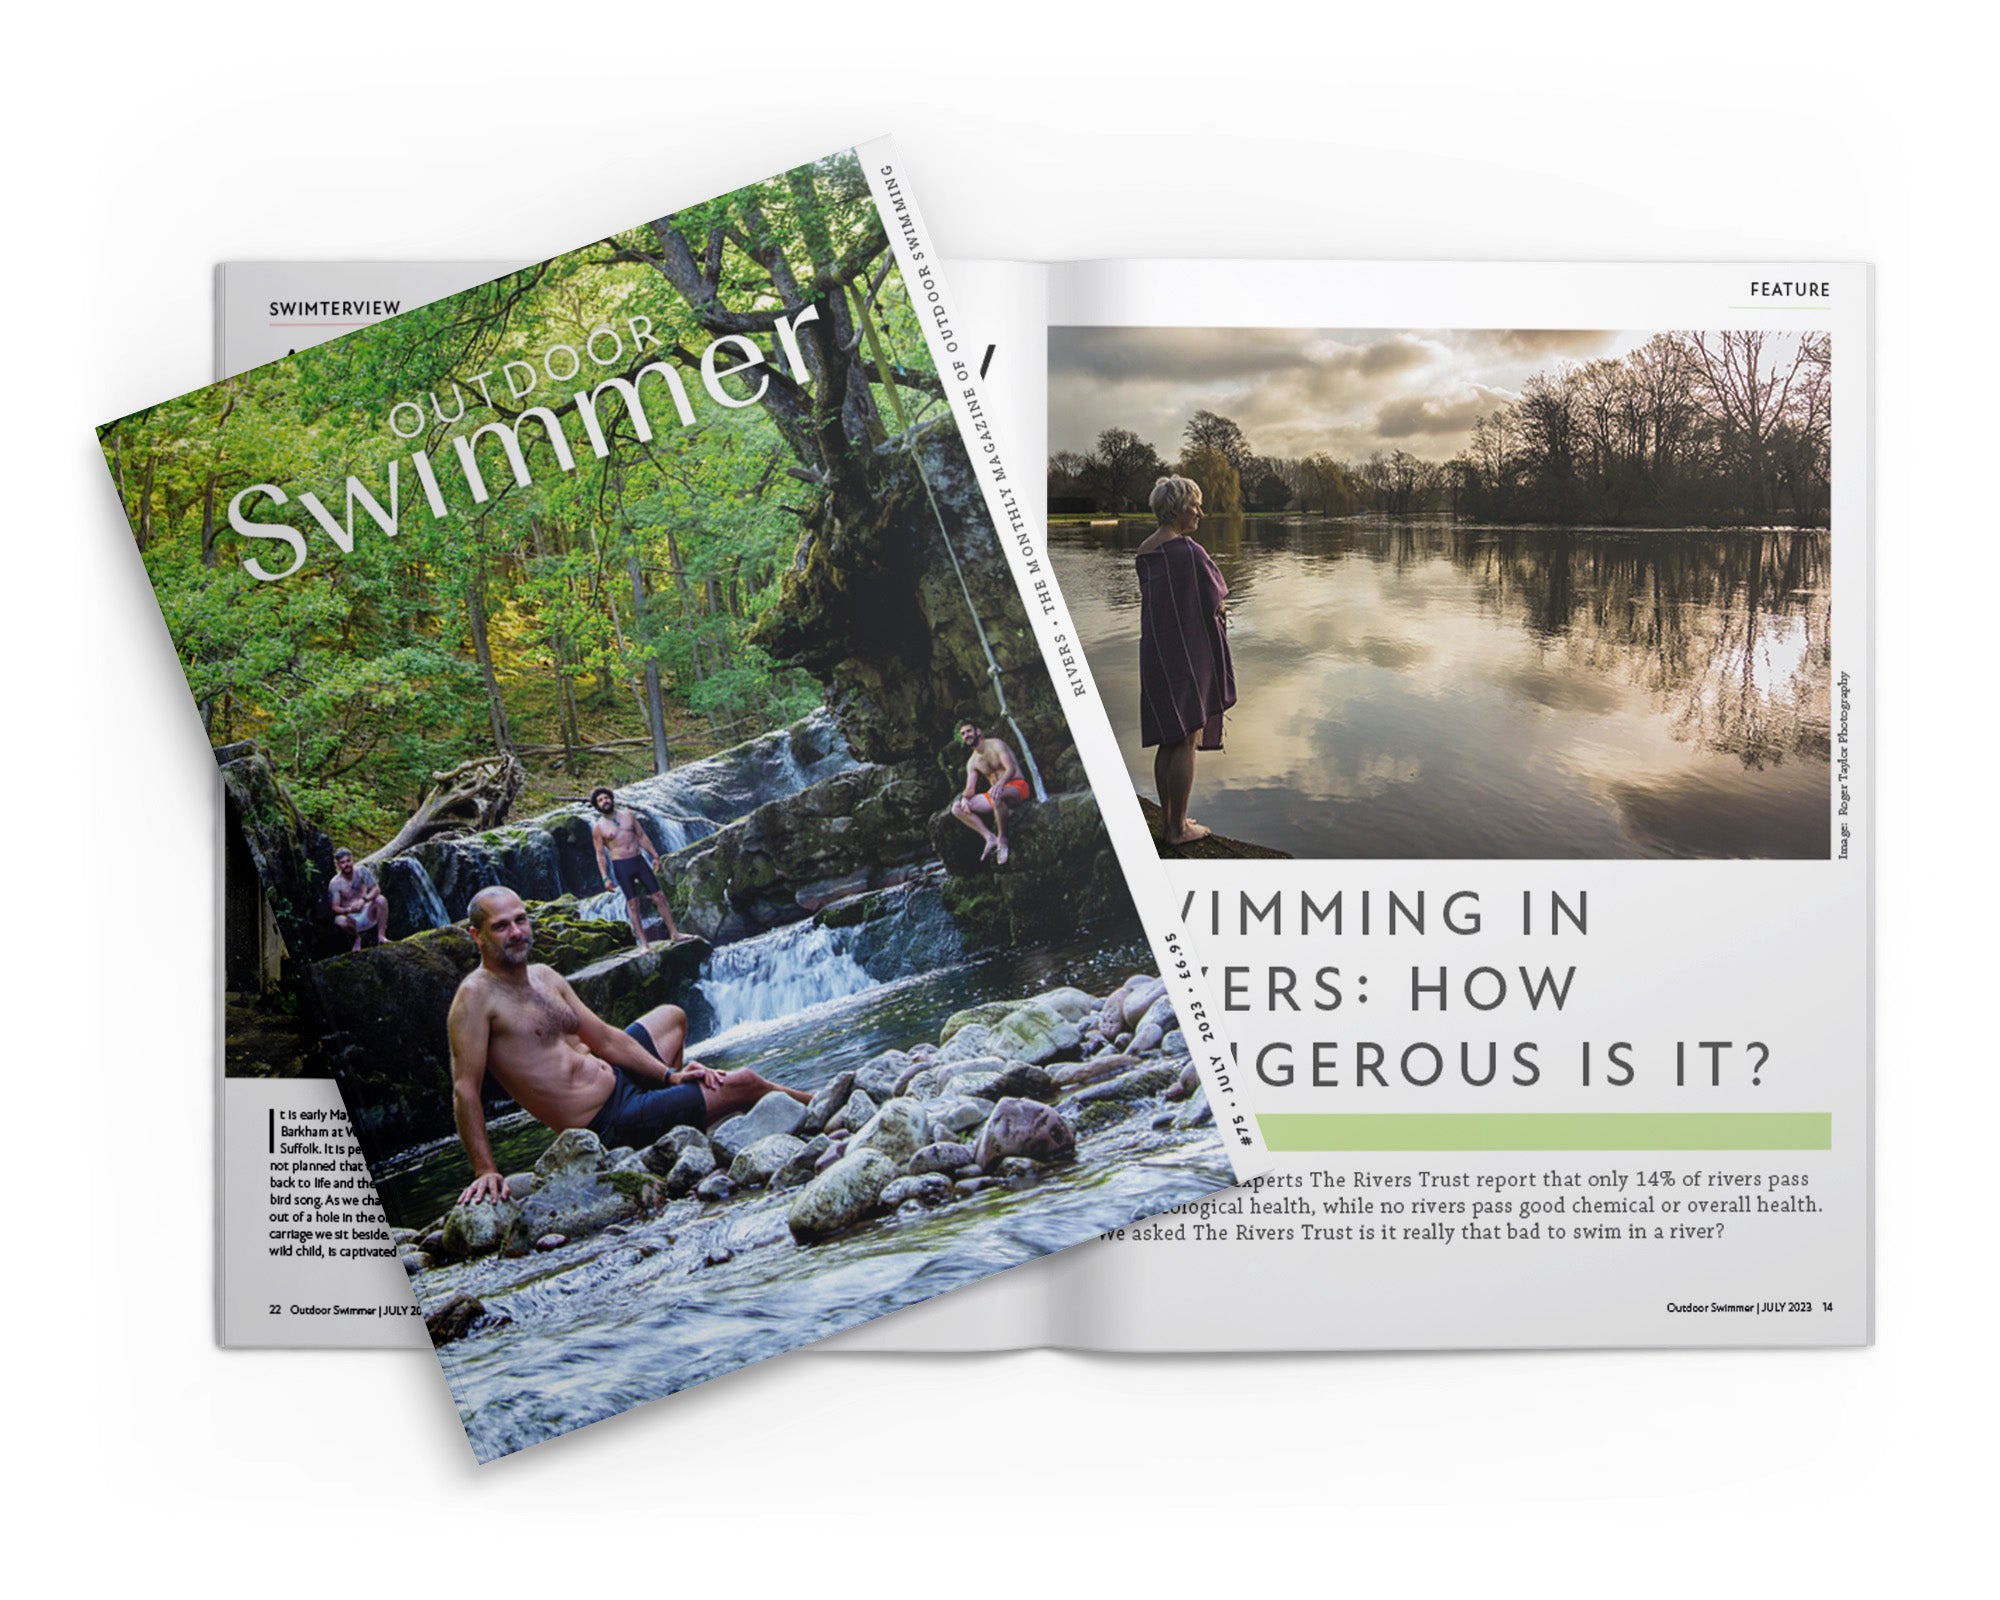 Outdoor Swimmer Magazine – RIVERS